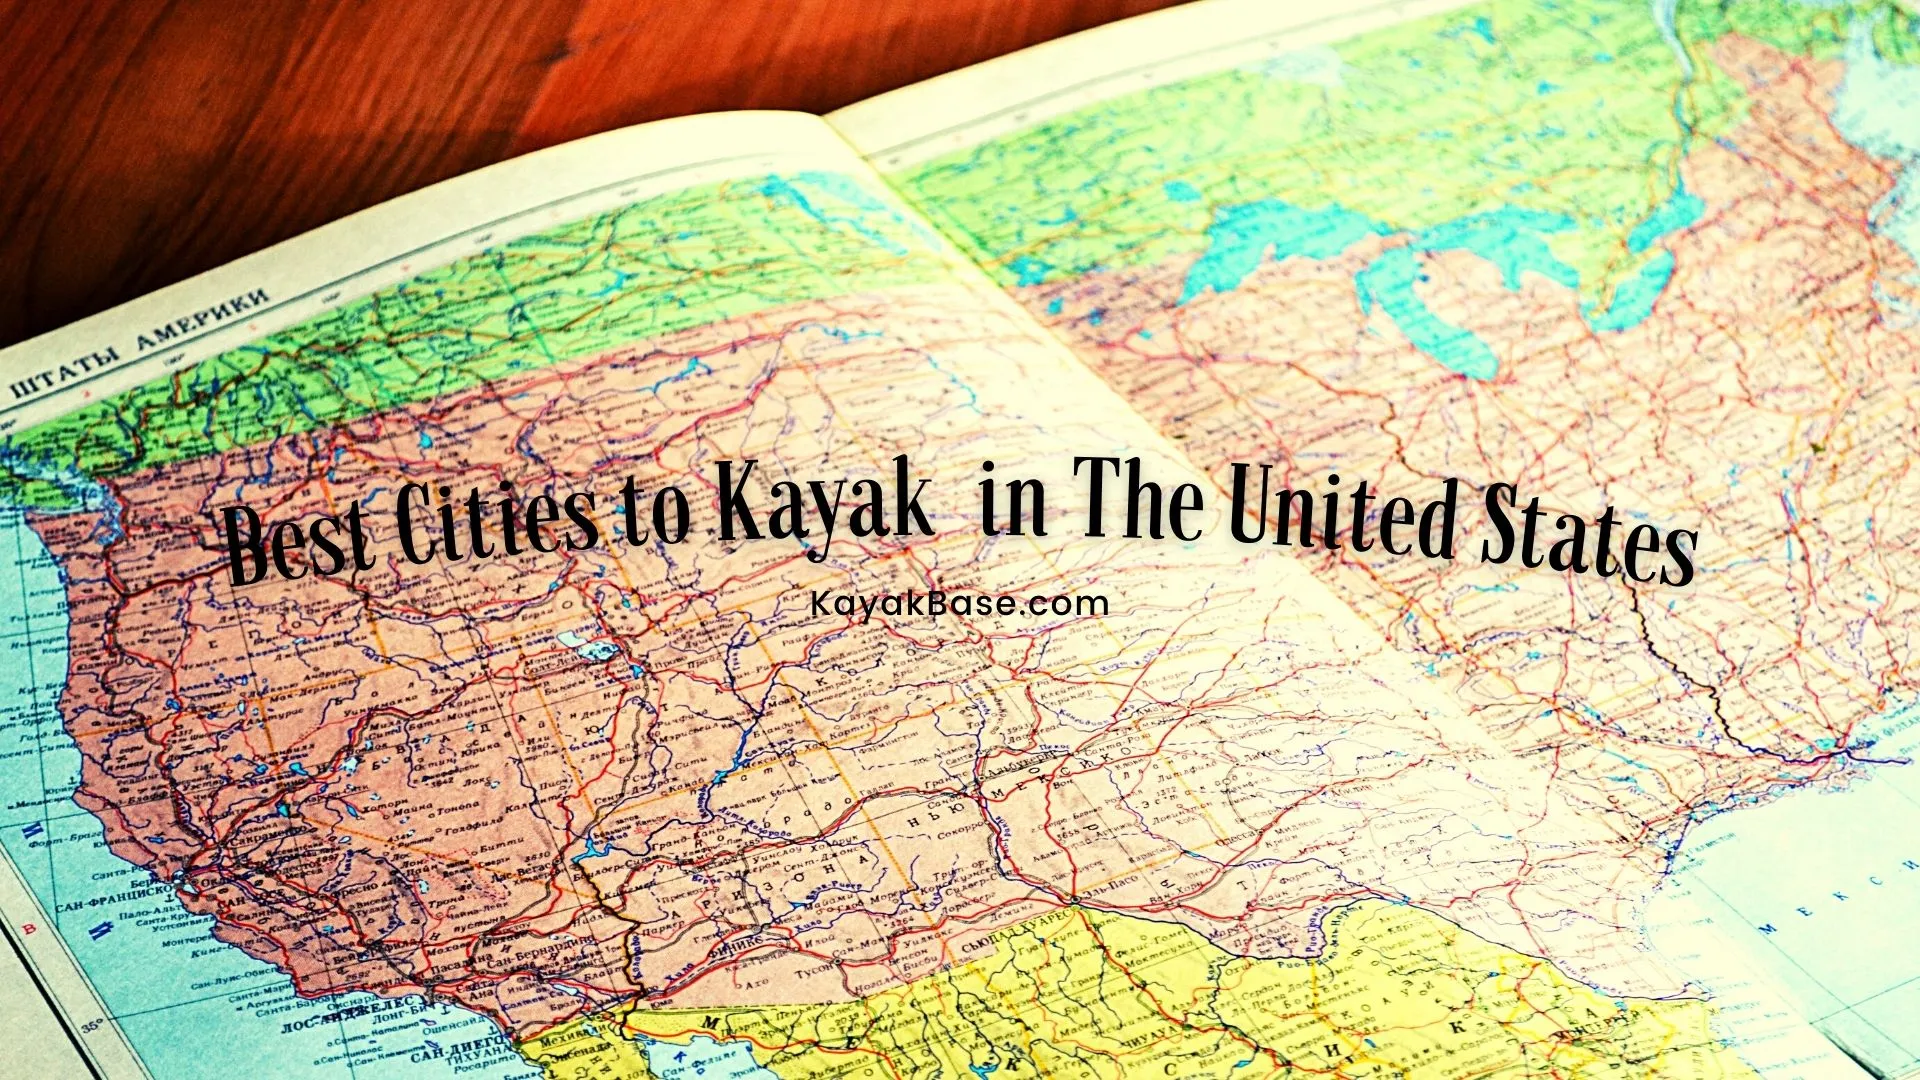 map of usa saying: Best Cities to Kayak in The United States